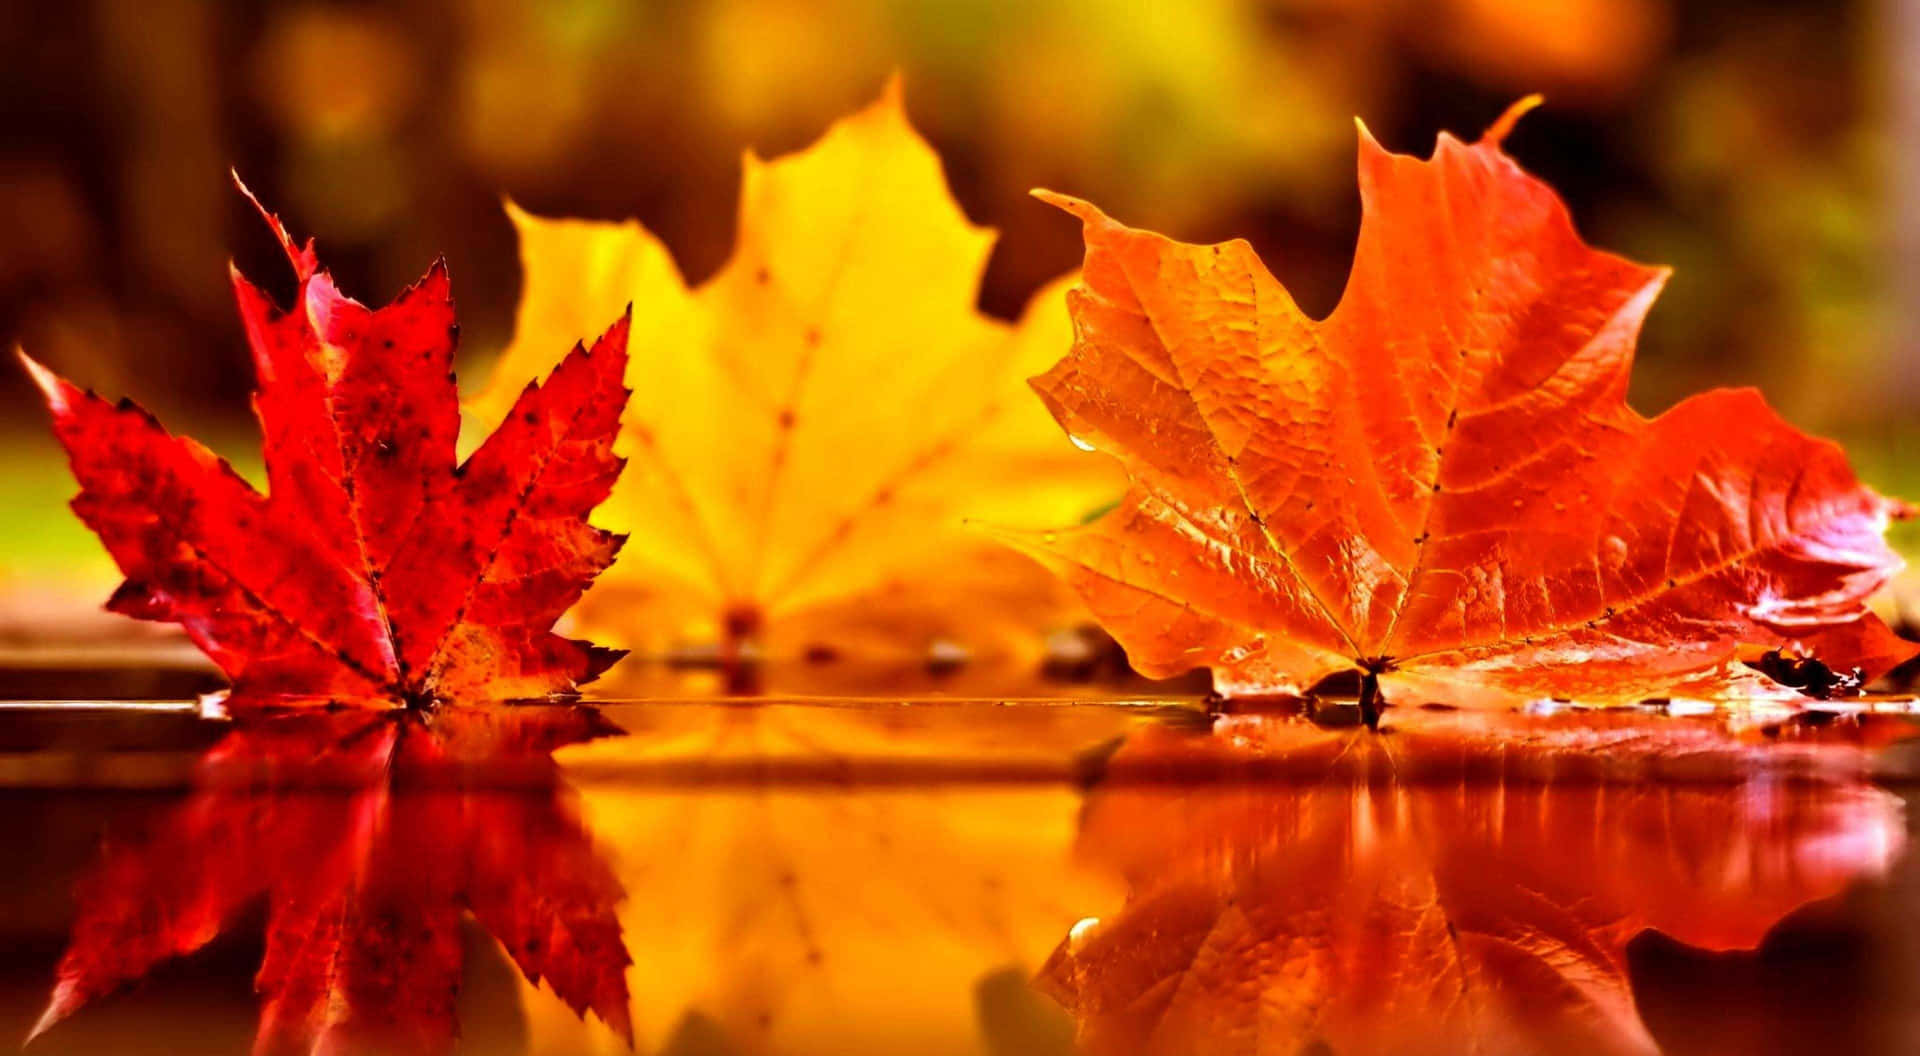 Fallen Leaves Blanketing the Ground in Autumn Wallpaper